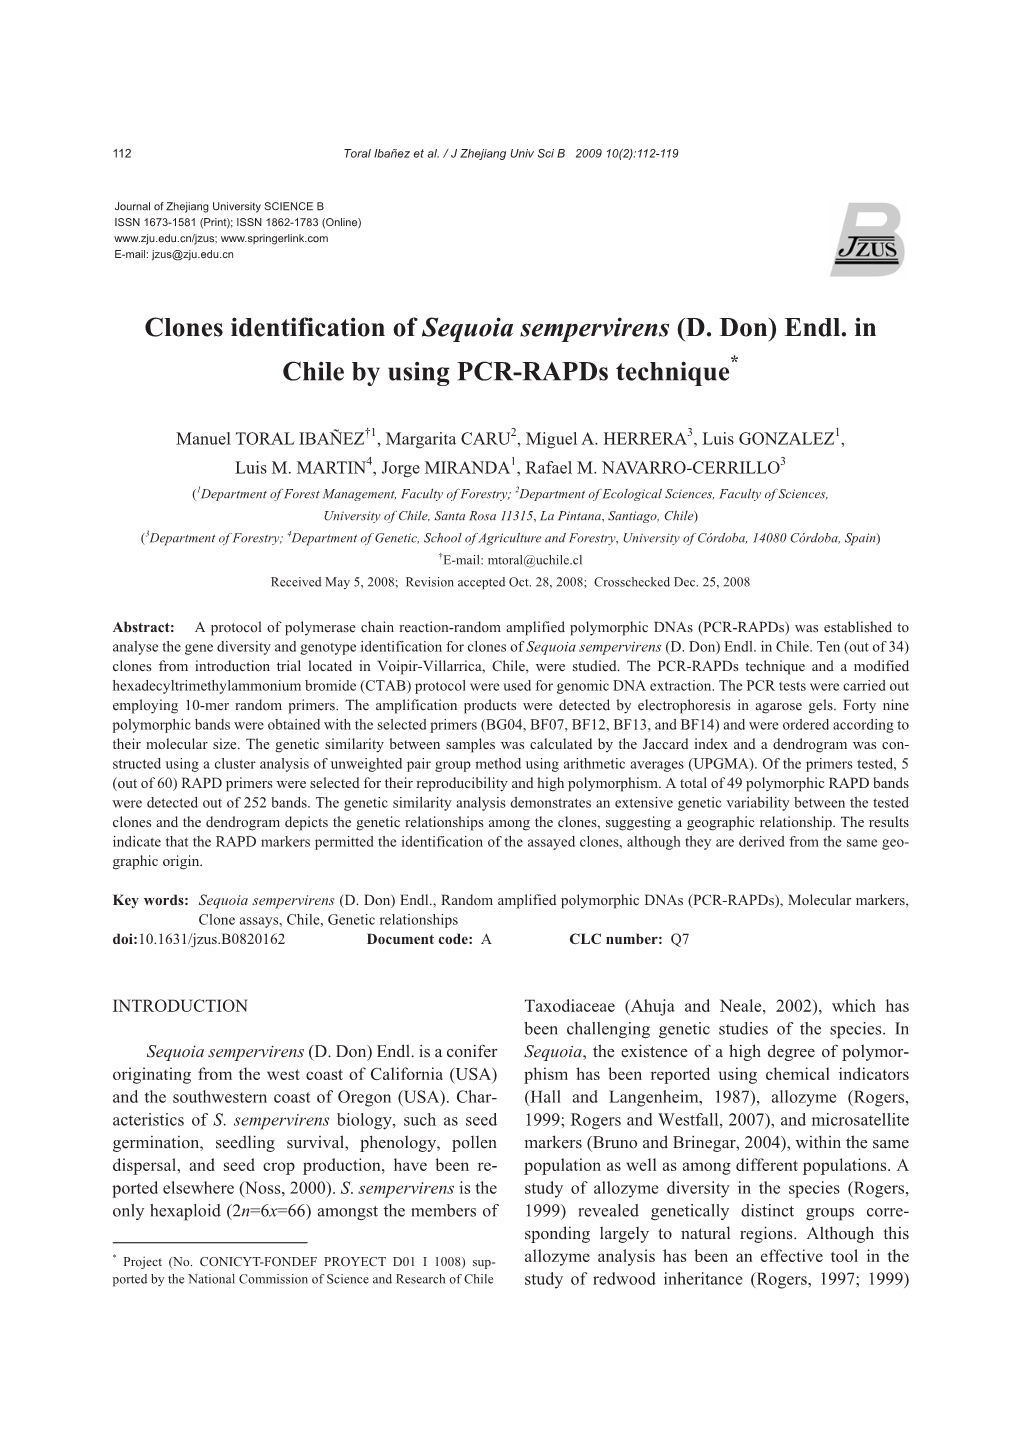 Clones Identification of Sequoia Sempervirens (D. Don) Endl. in Chile by Using PCR-Rapds Technique*